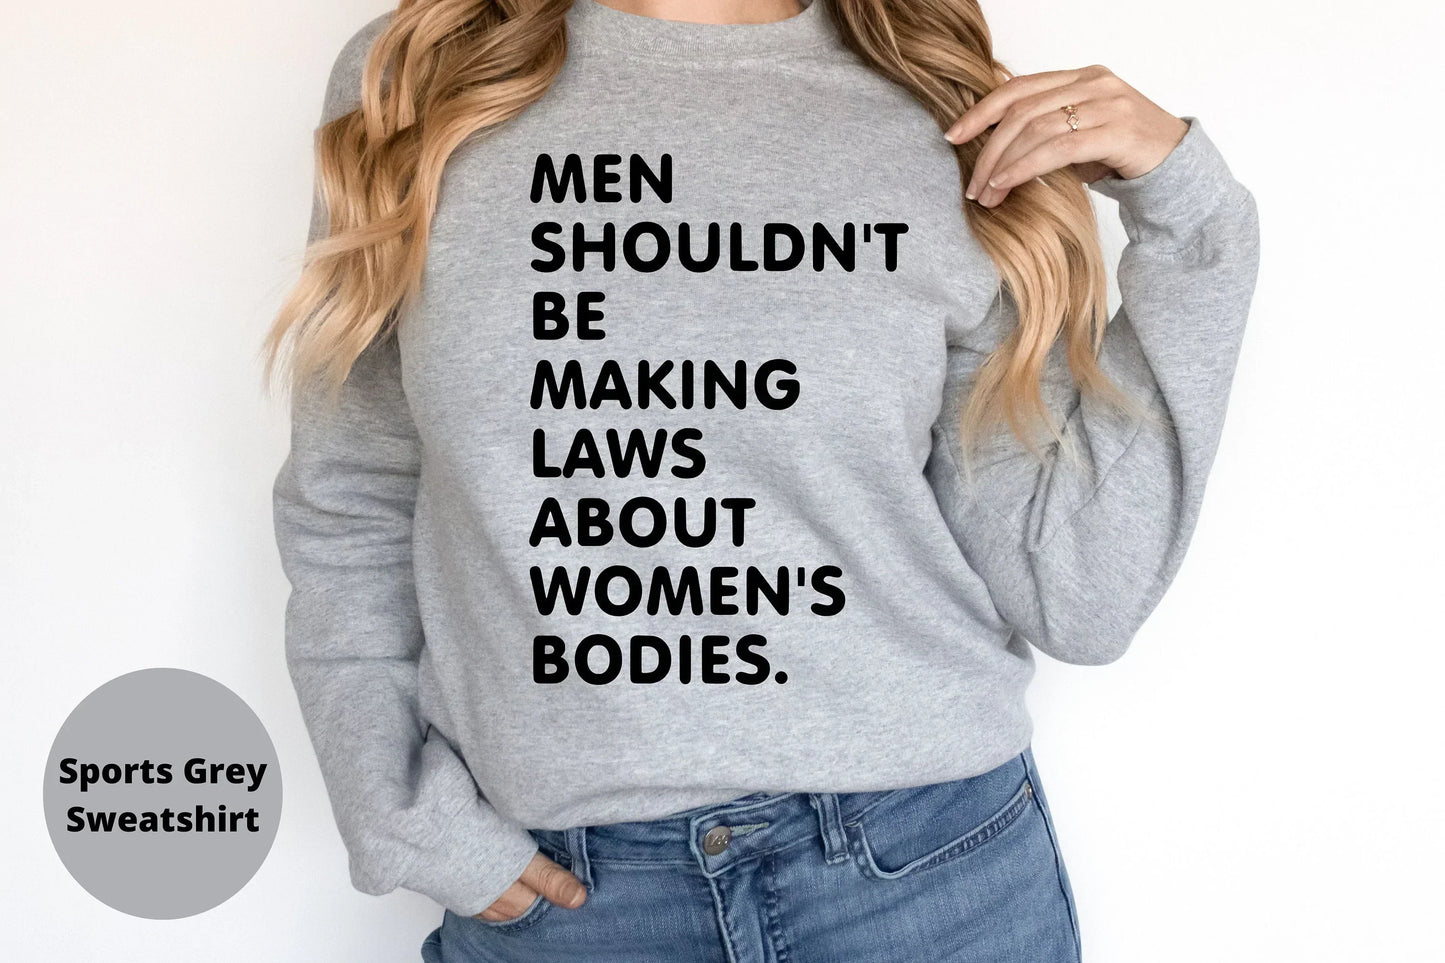 My Body My Choice Shirt, Protest T-Shirt, Abortion Rights, Female Pro Choice Shirt, Roe vs Wade,Activist,Equality Sweatshirt,Feminist Hoodie